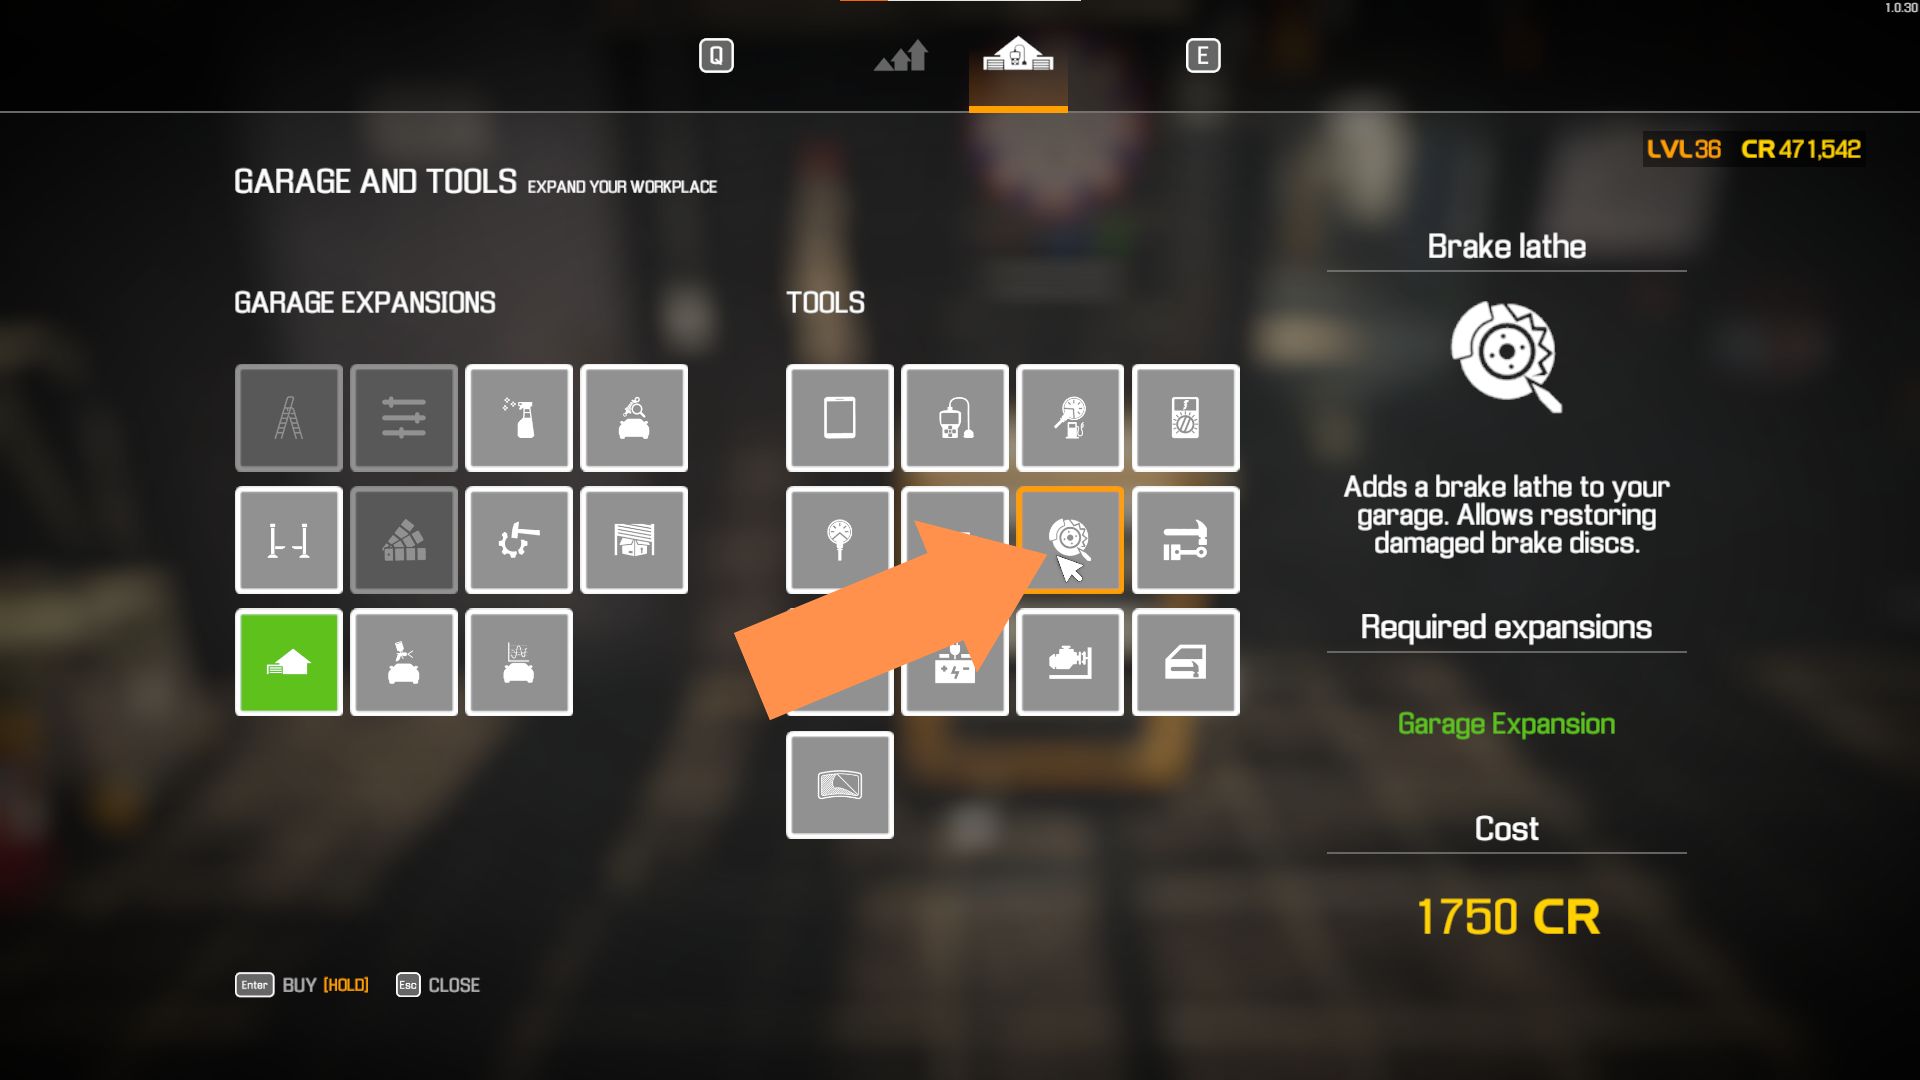 A screenshot showing where to purchase the Garage Expansion upgrade from in Car Mechanic Simulator